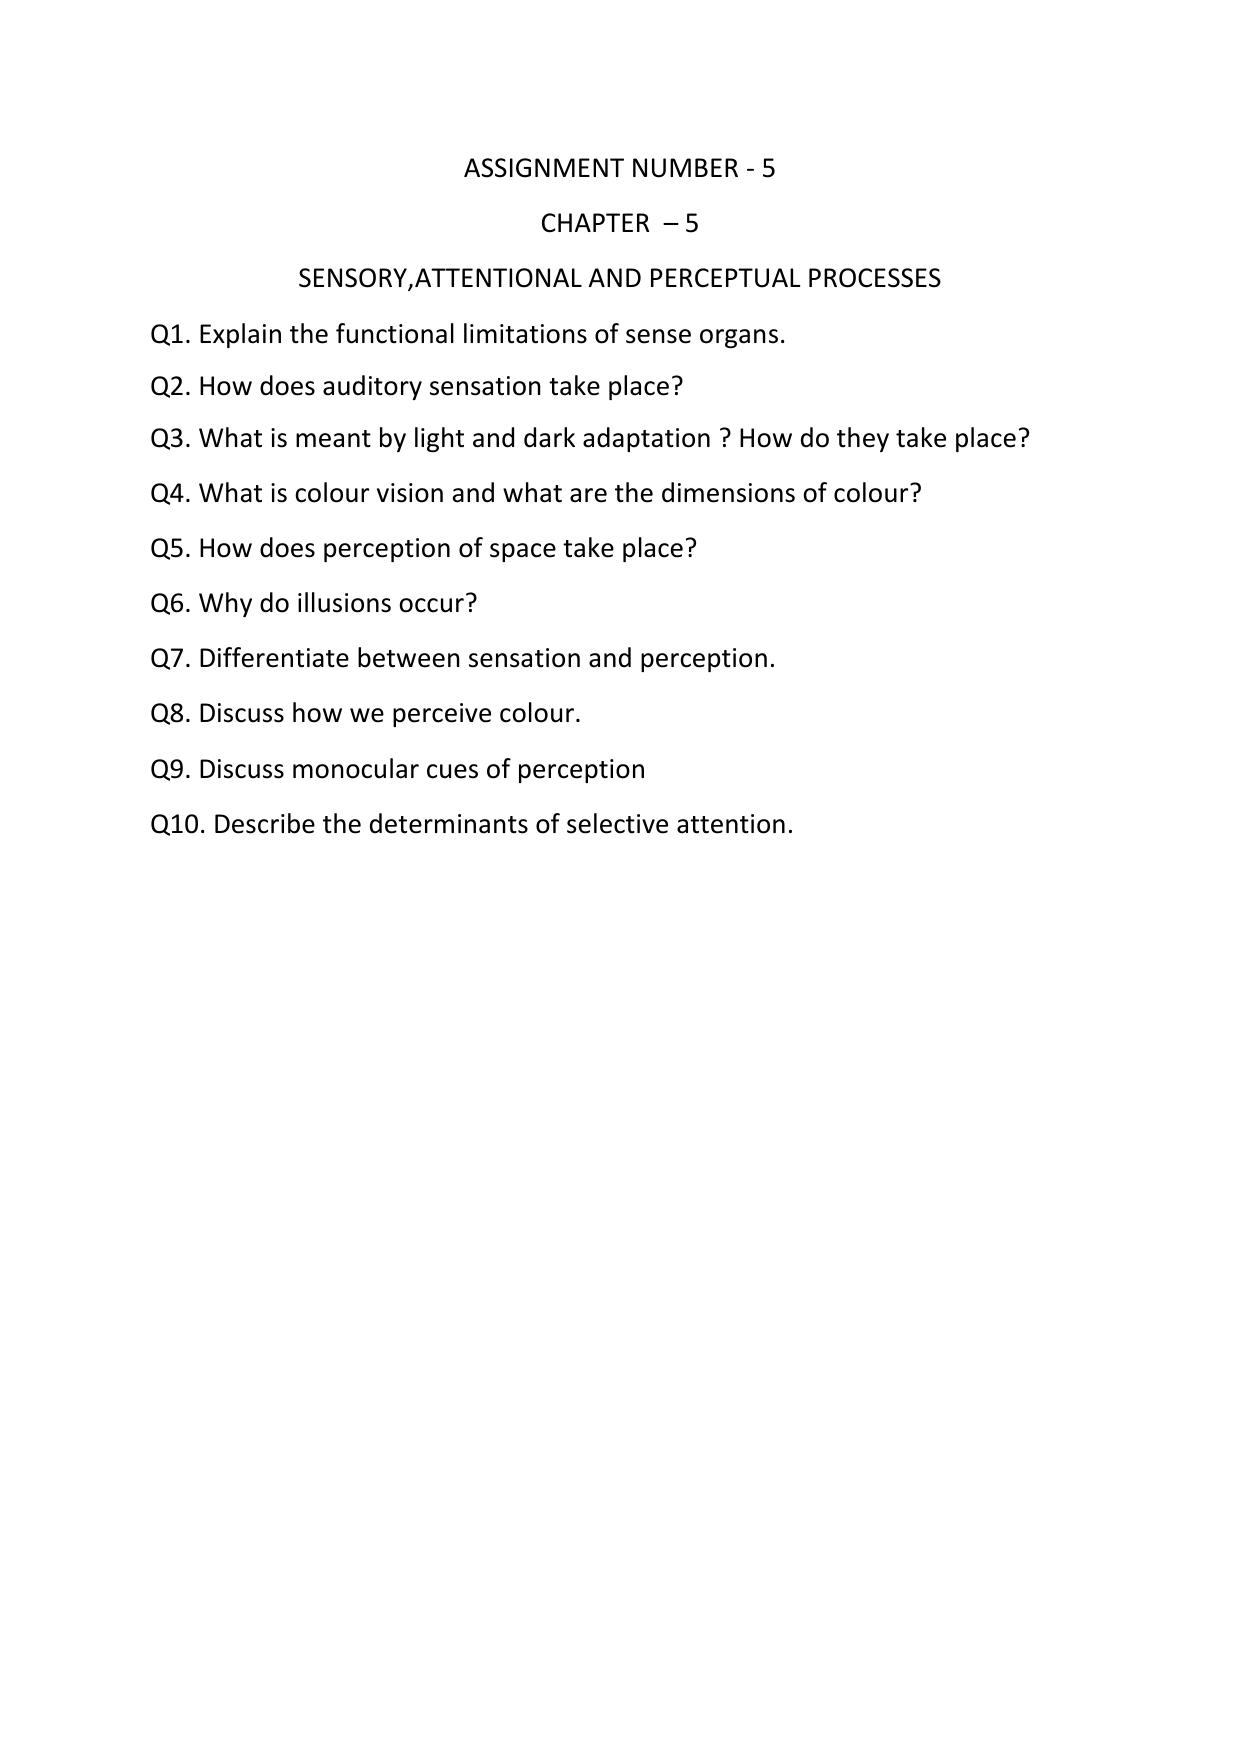 CBSE Worksheets for Class 11 Psychology Sensory Attentional and Perceptual Process Assignment 2 - Page 1